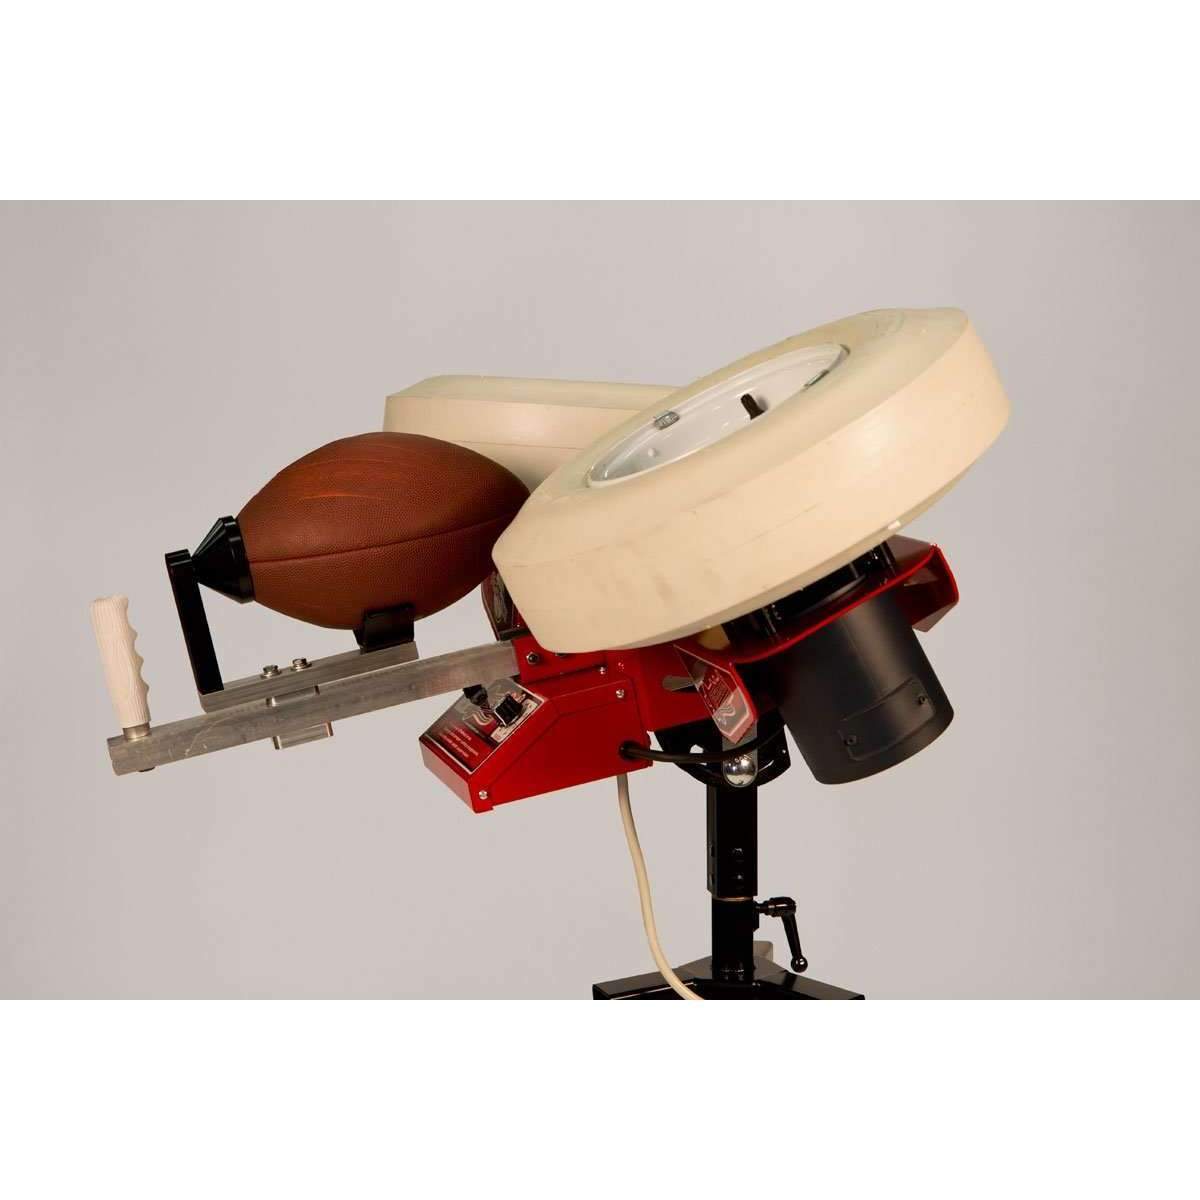 First Pitch Quarterback Football Throwing Machine Closeup Right Side View